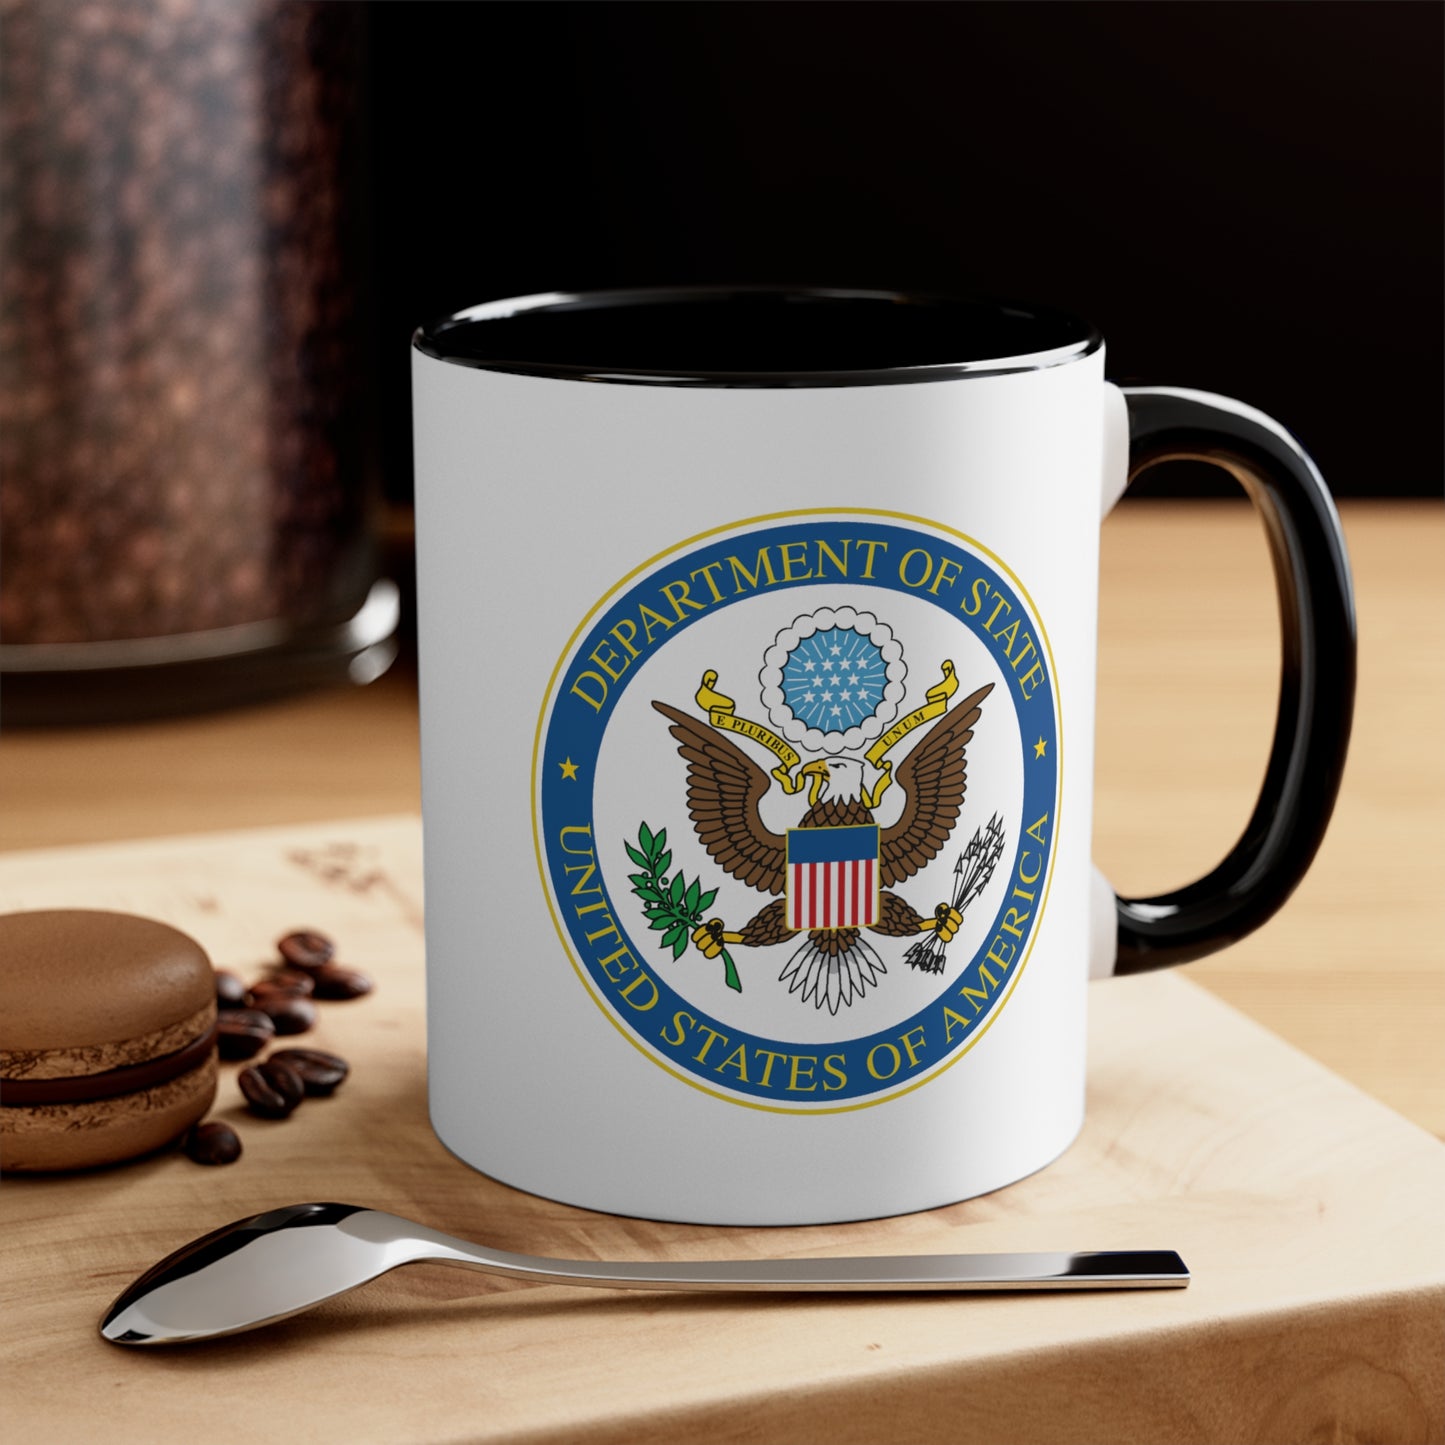 Department of State Coffee Mug - Double Sided Black Accent White Ceramic 11oz by TheGlassyLass.com